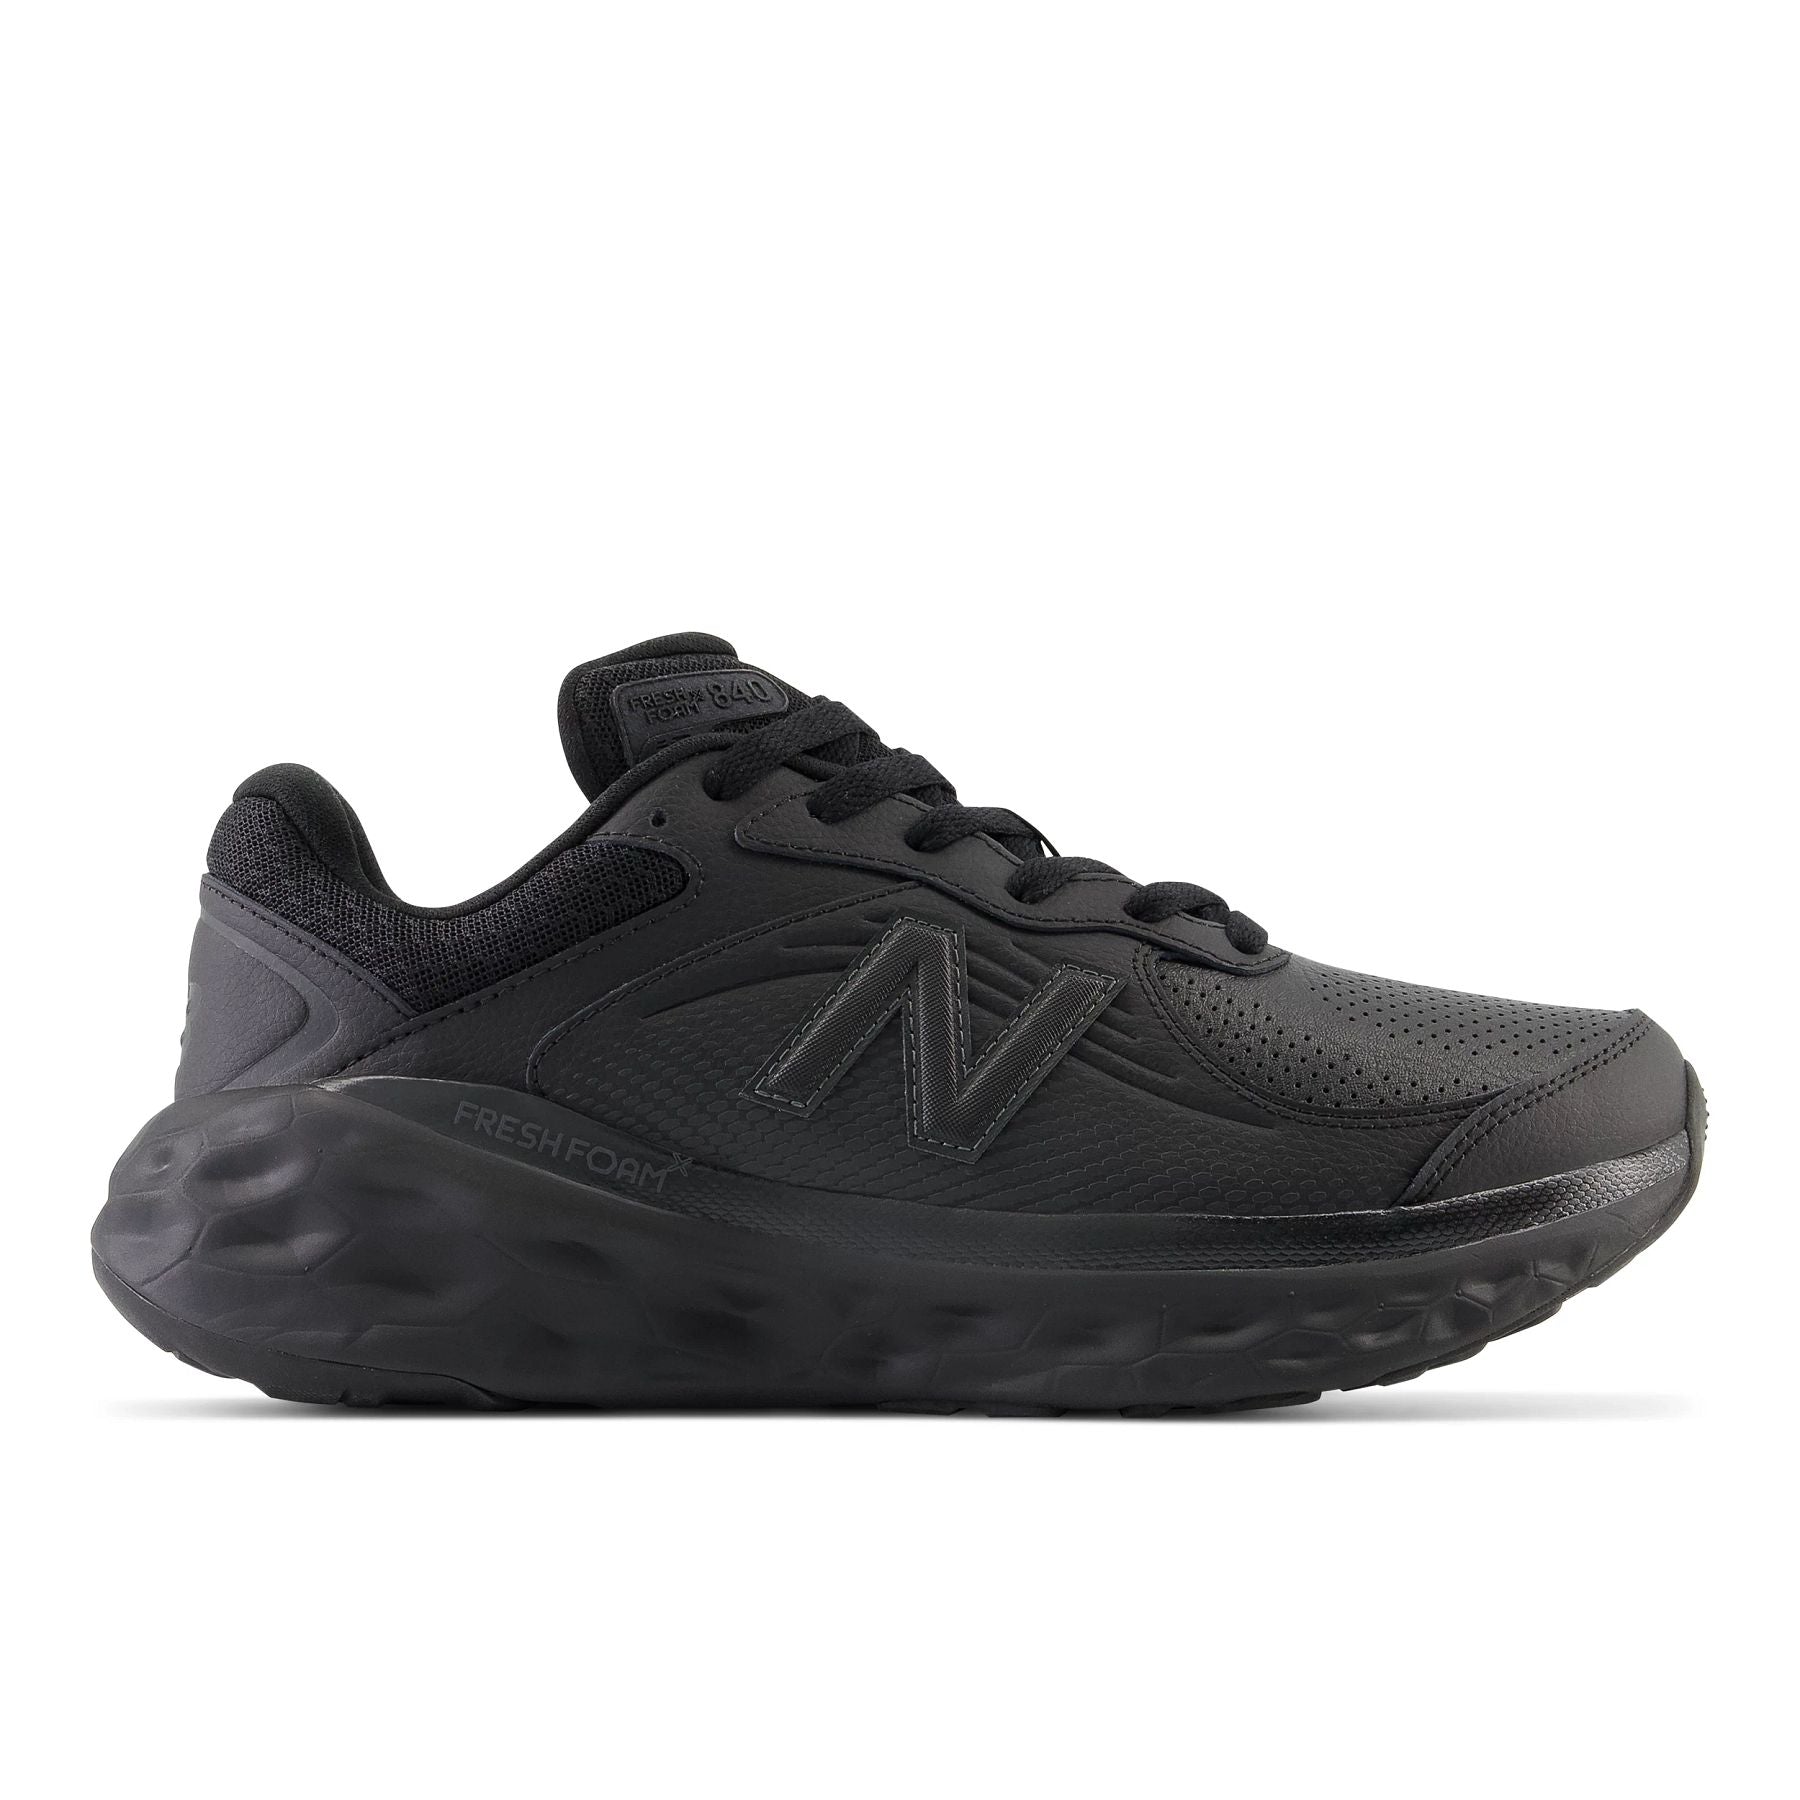 Lateral view of the Women's leather walking shoe WW840 V1 from New Balance in all Black